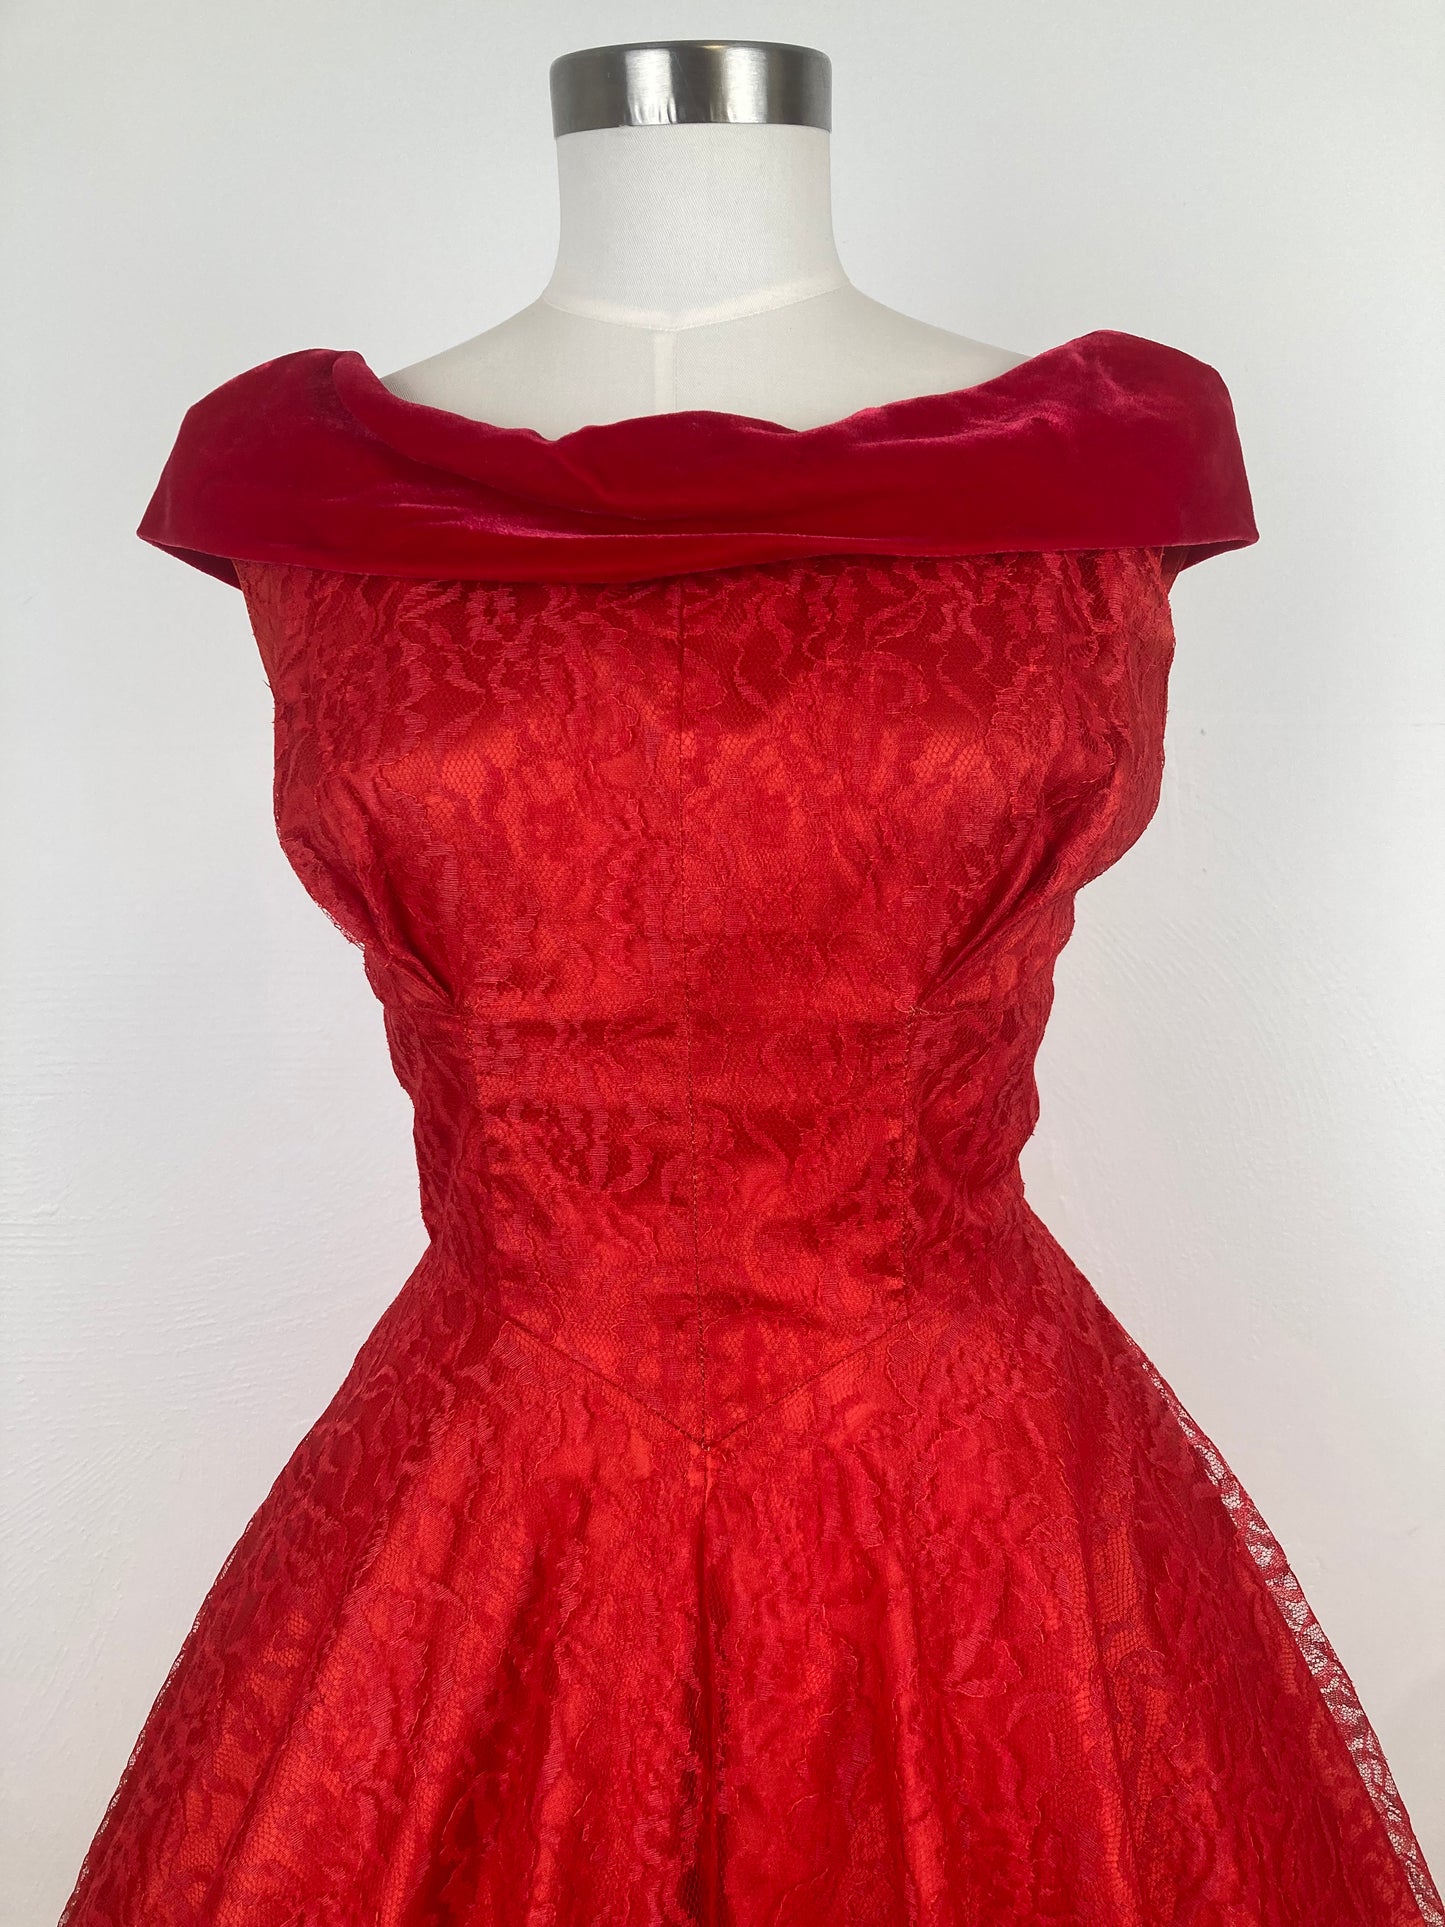 1950s Red Lace and Velvet Party Dress, Size M